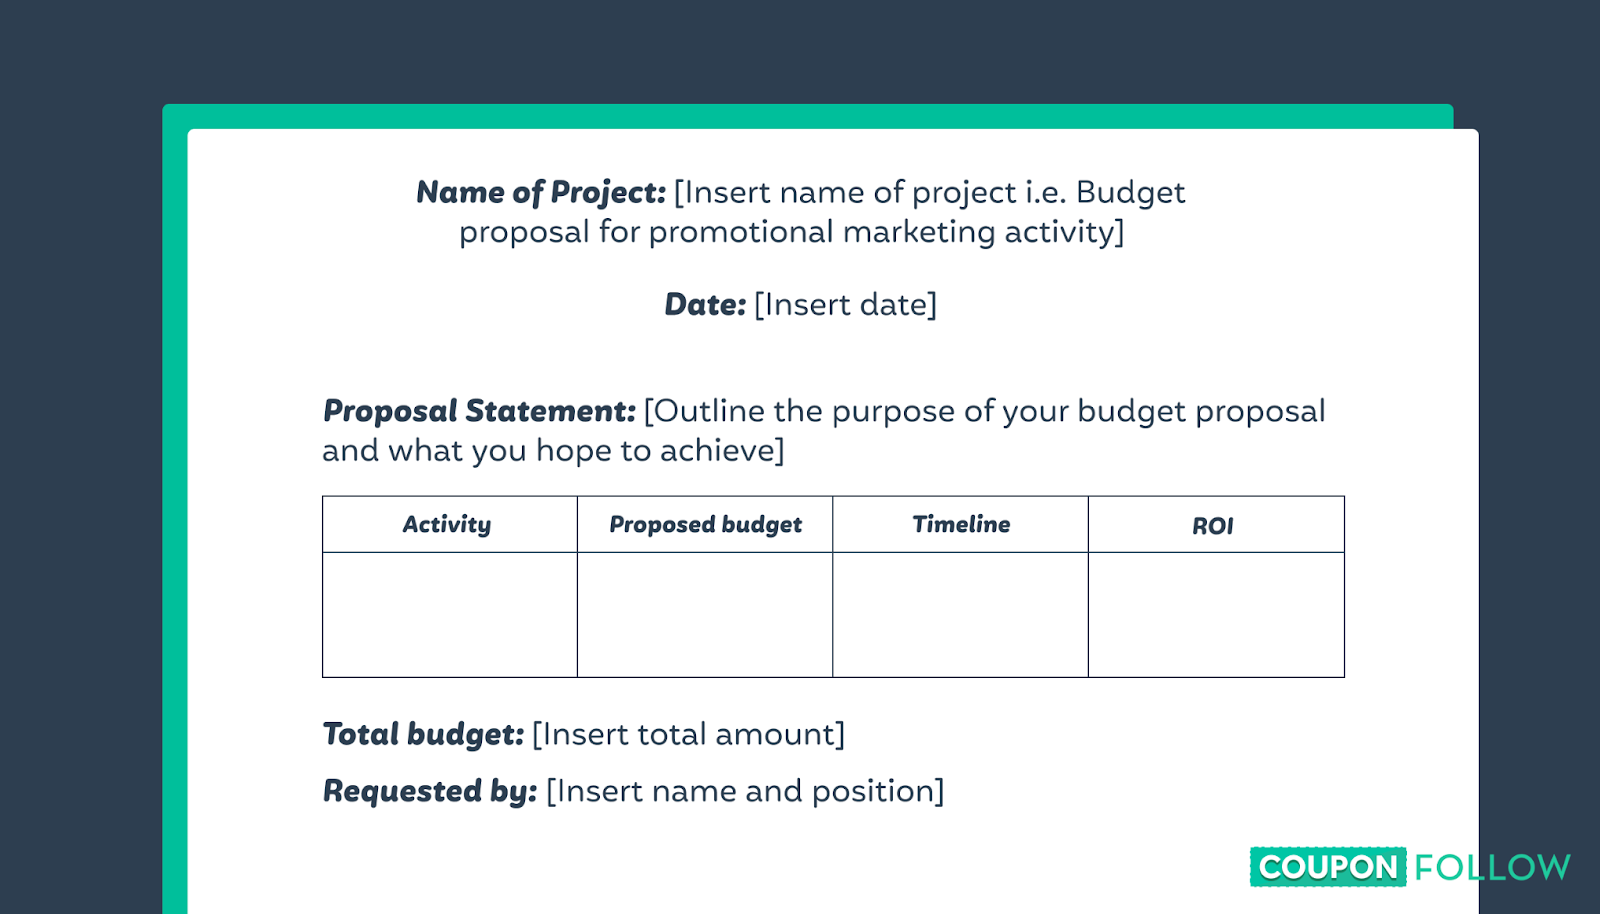 Template for a budget proposal